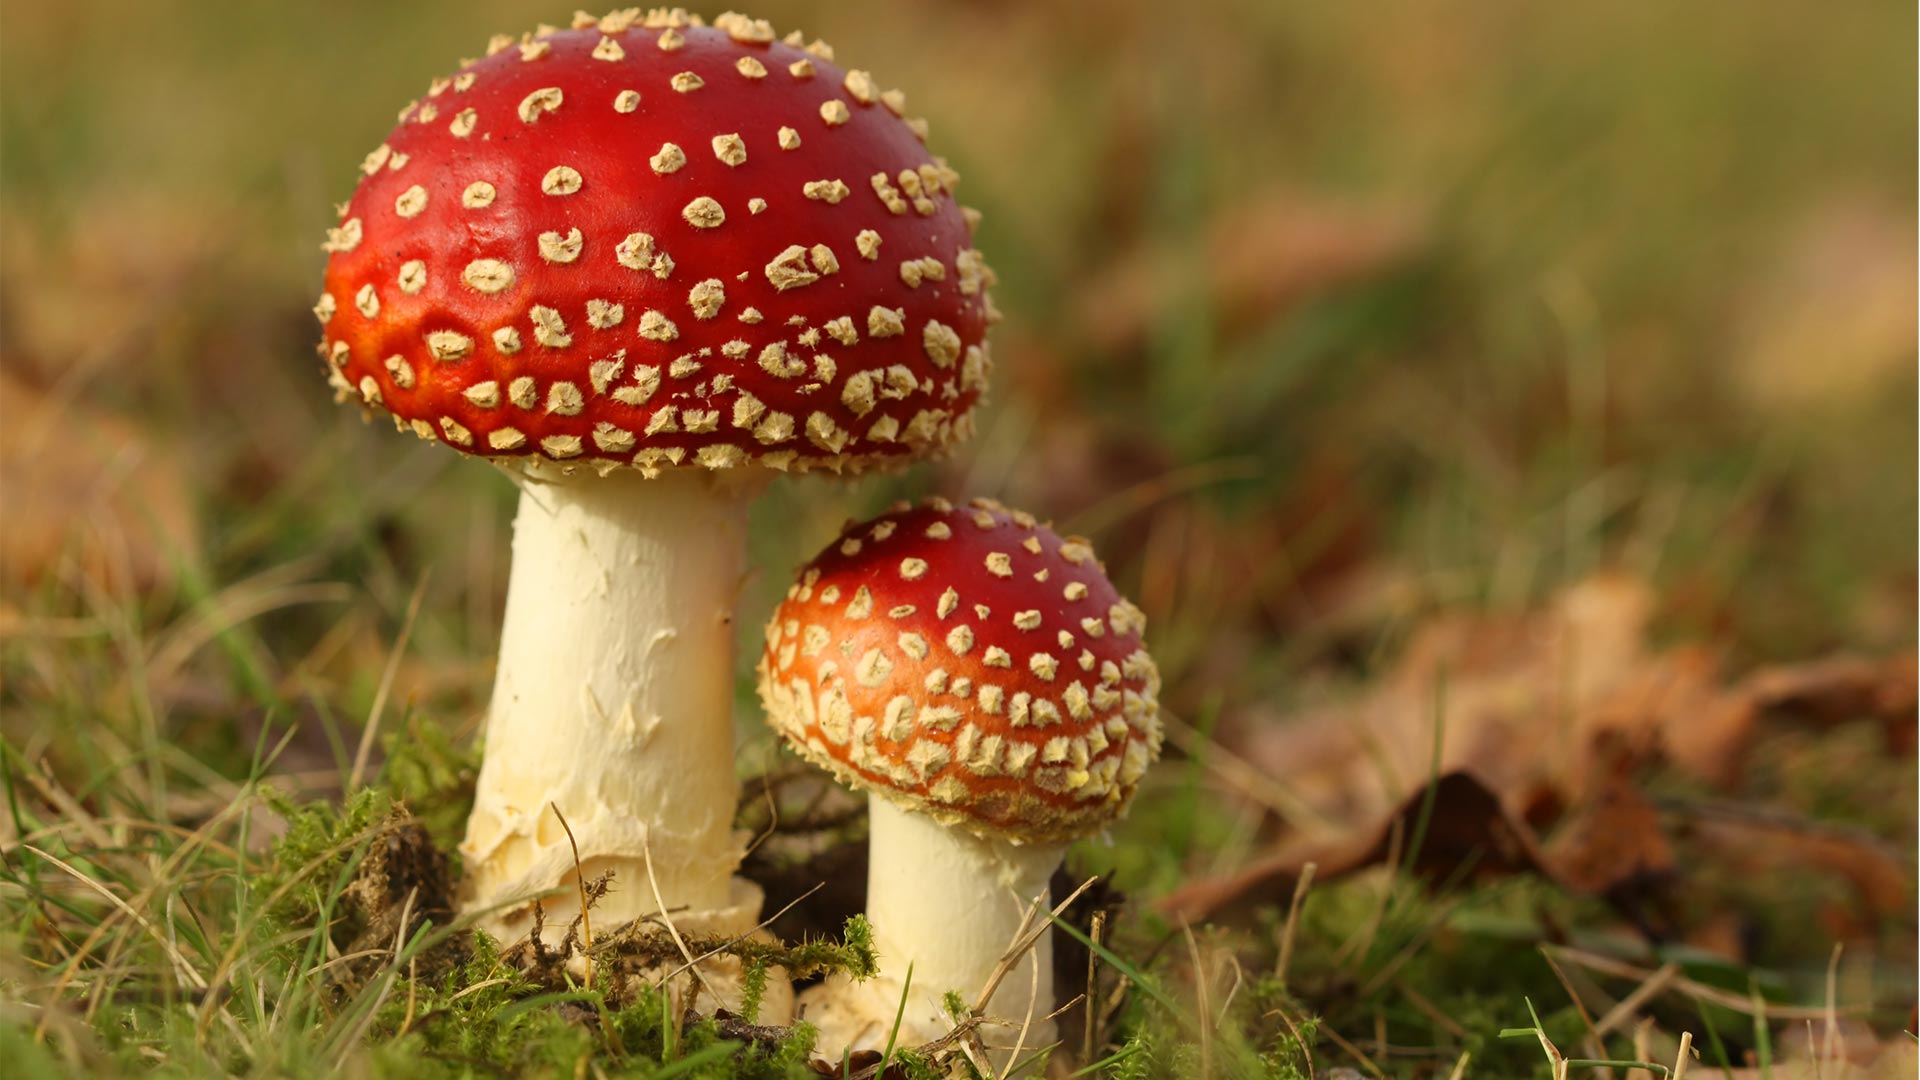 Little and large red toadstool